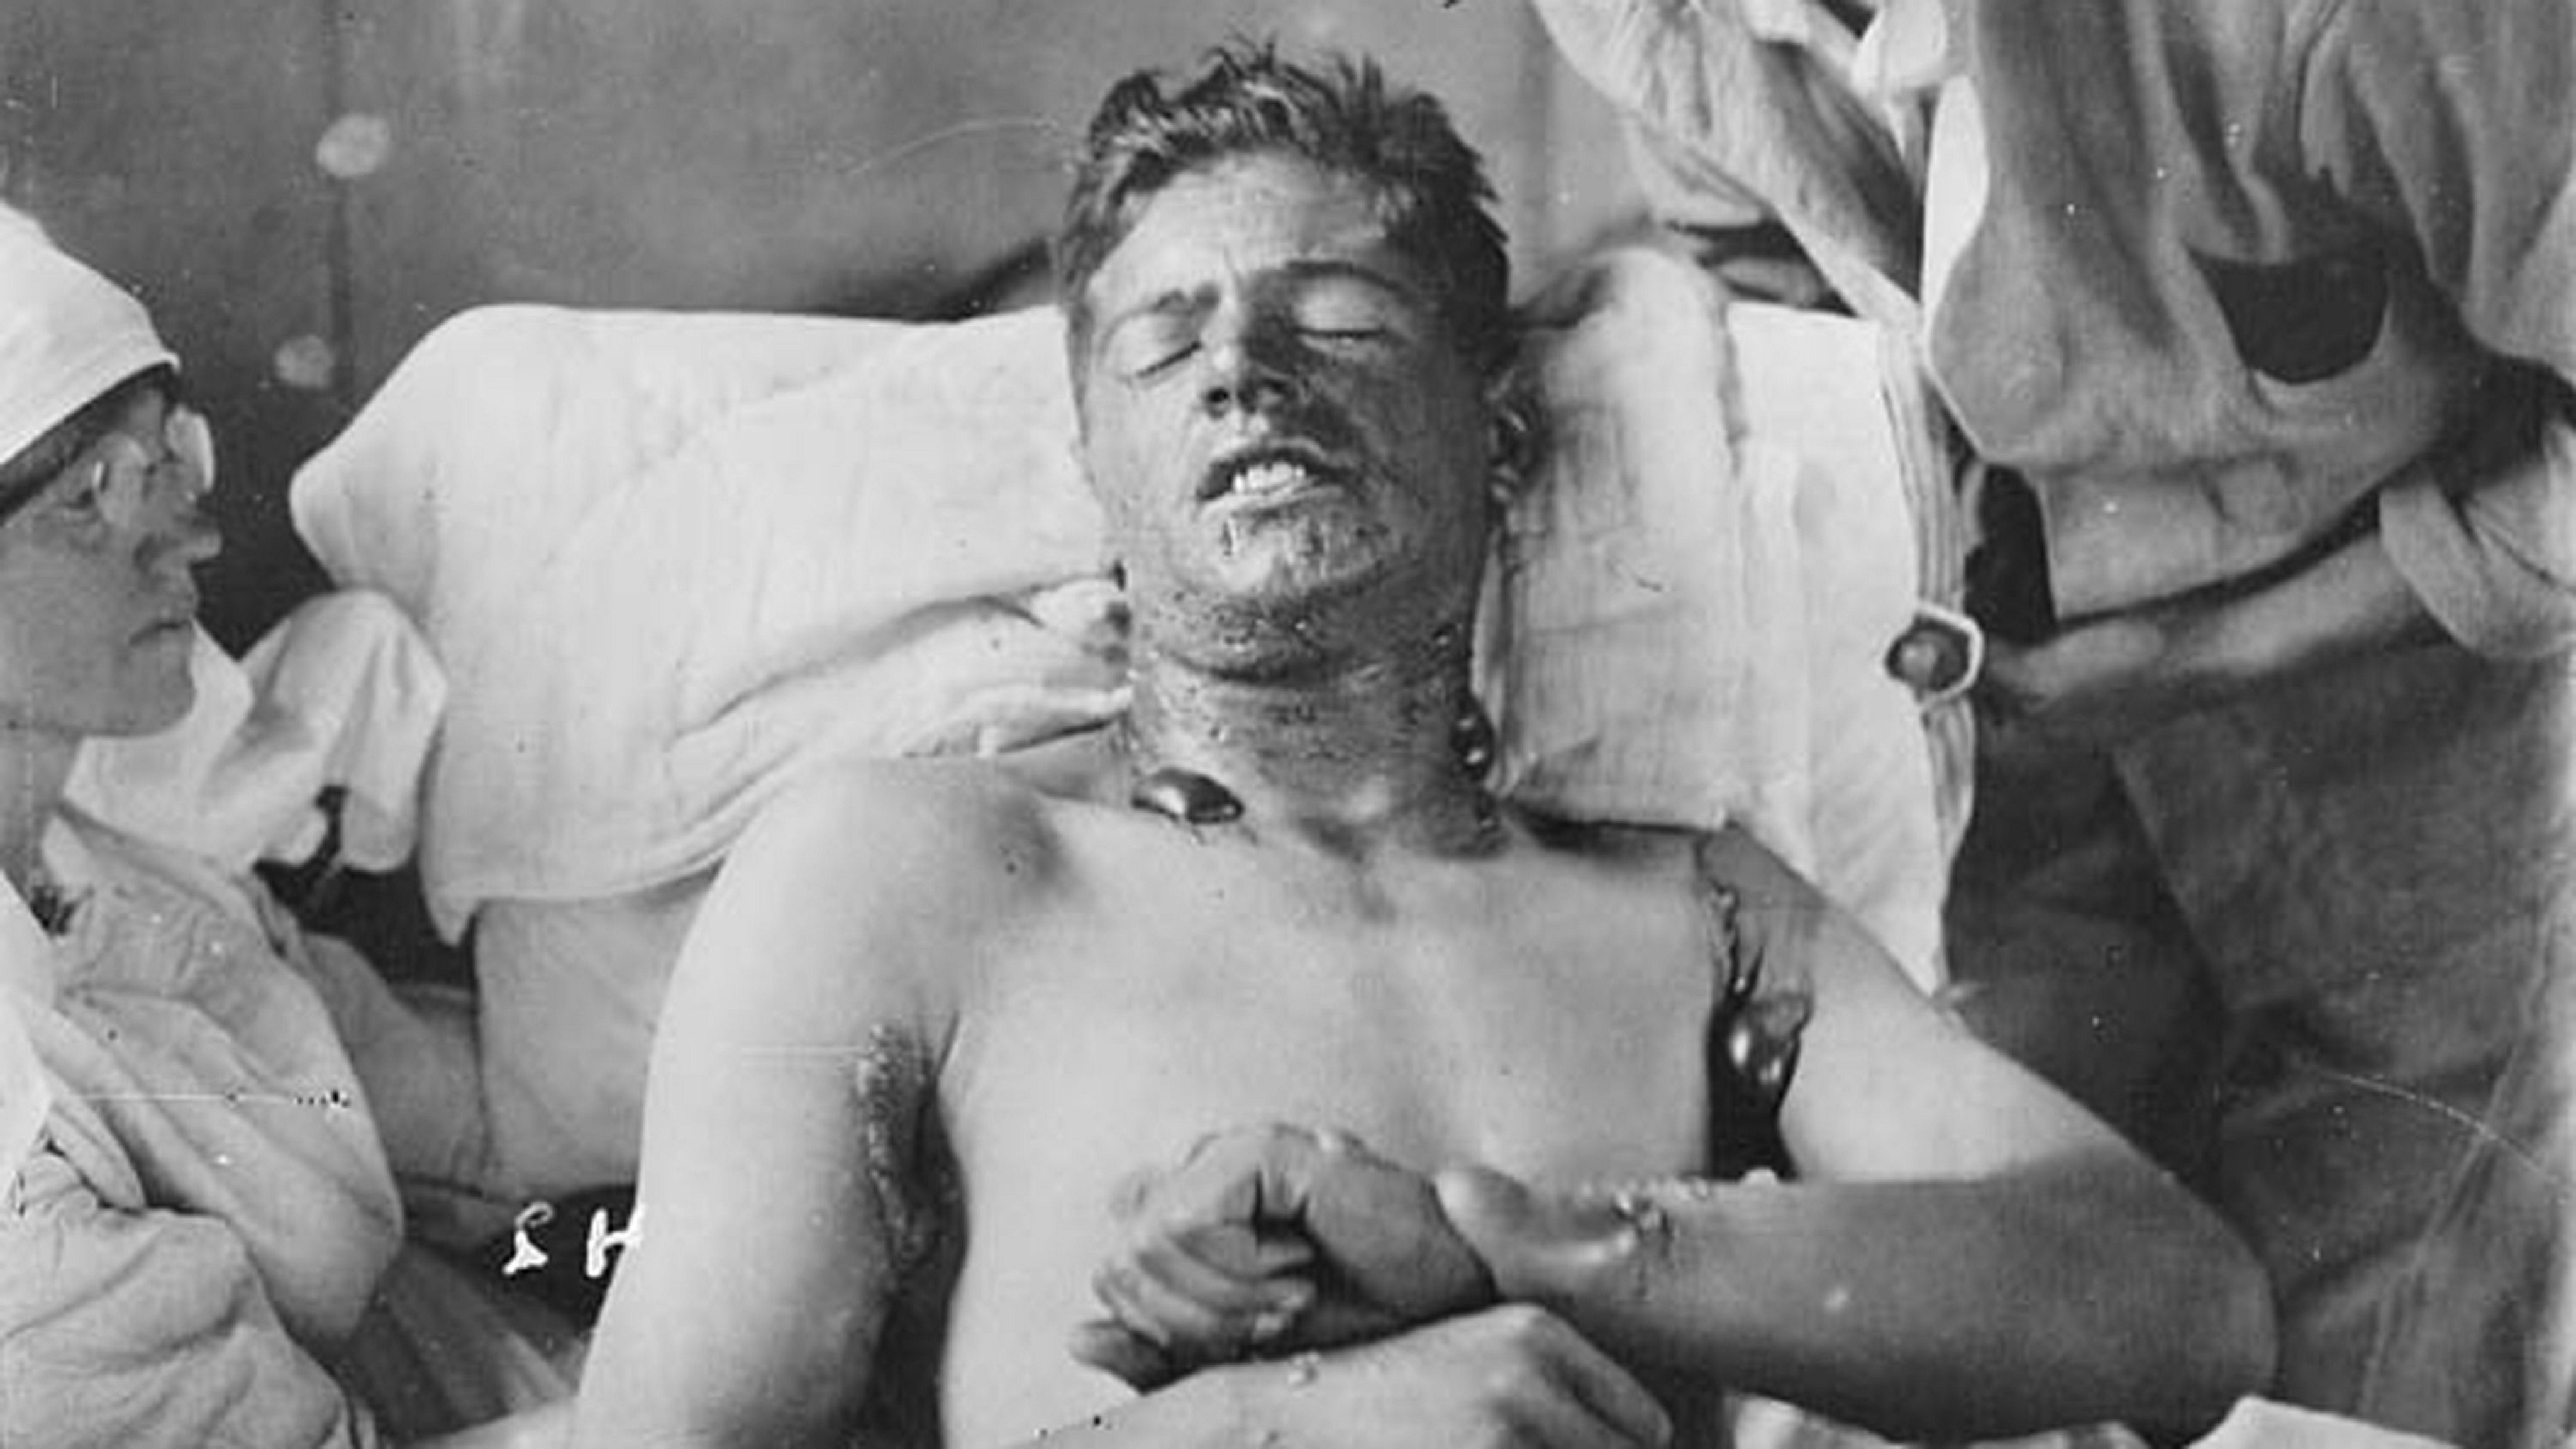 Canadian soldier in a field hospital, with mustard gas burns.